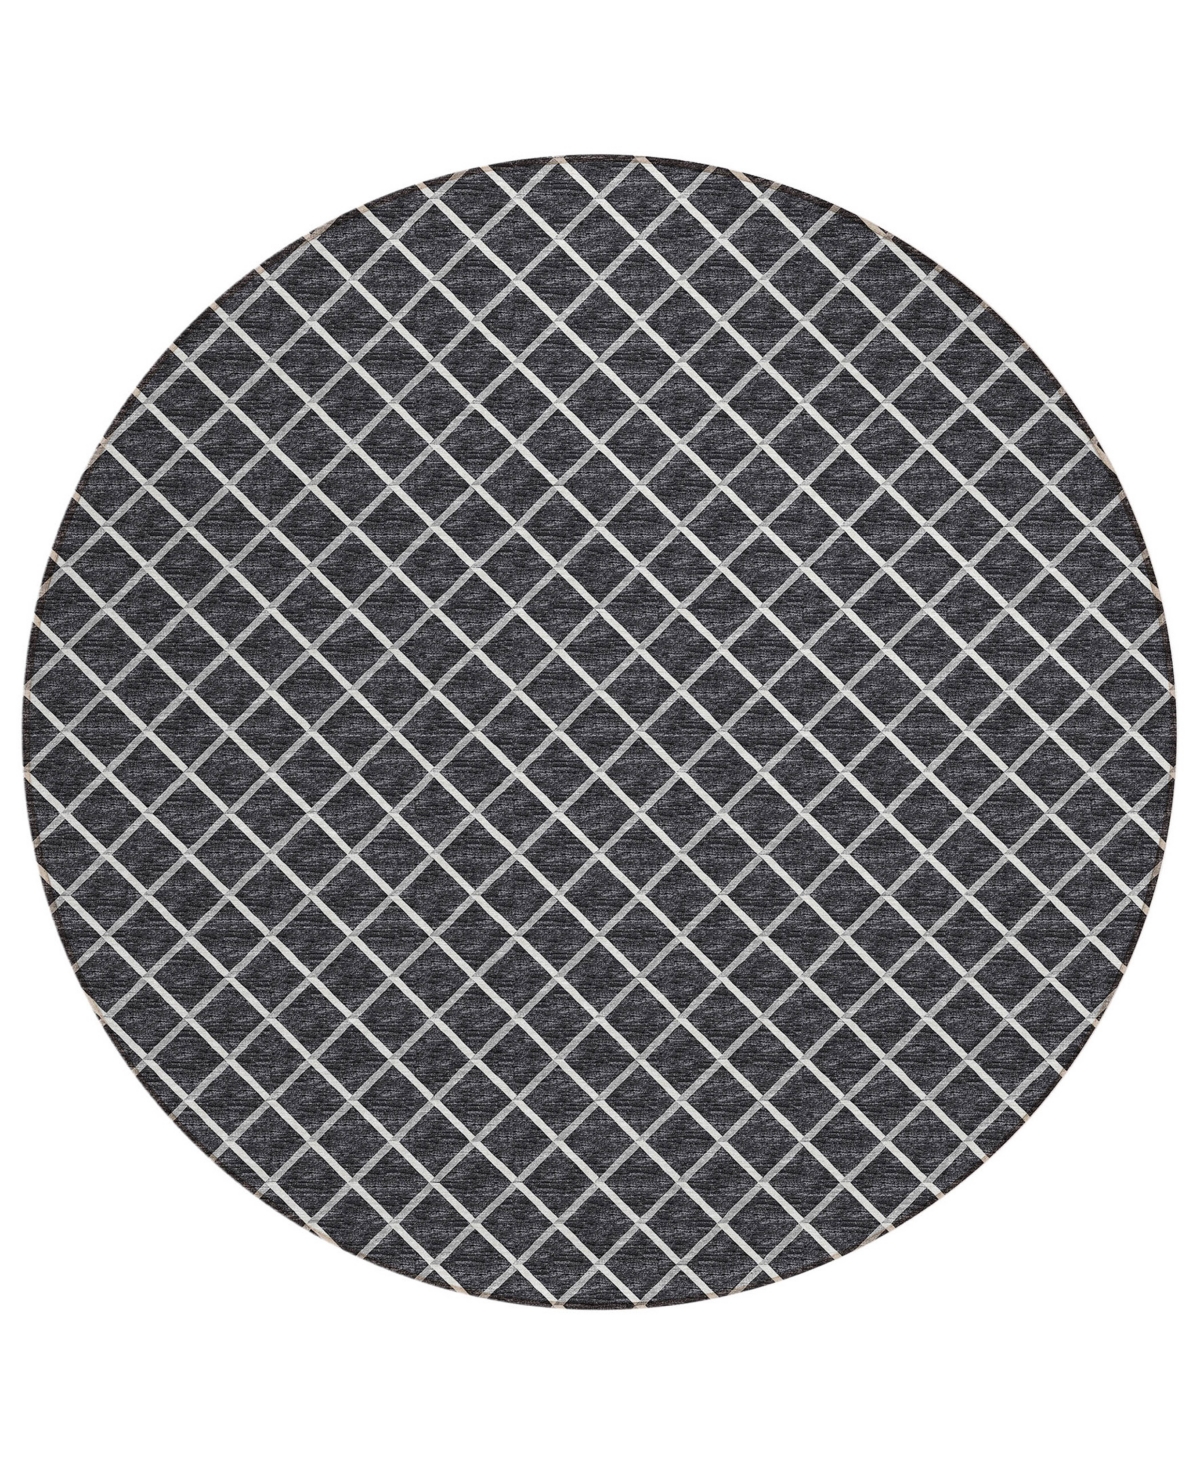 D Style Victory Washable VCY1 10' x 10' Round Area Rug - Black